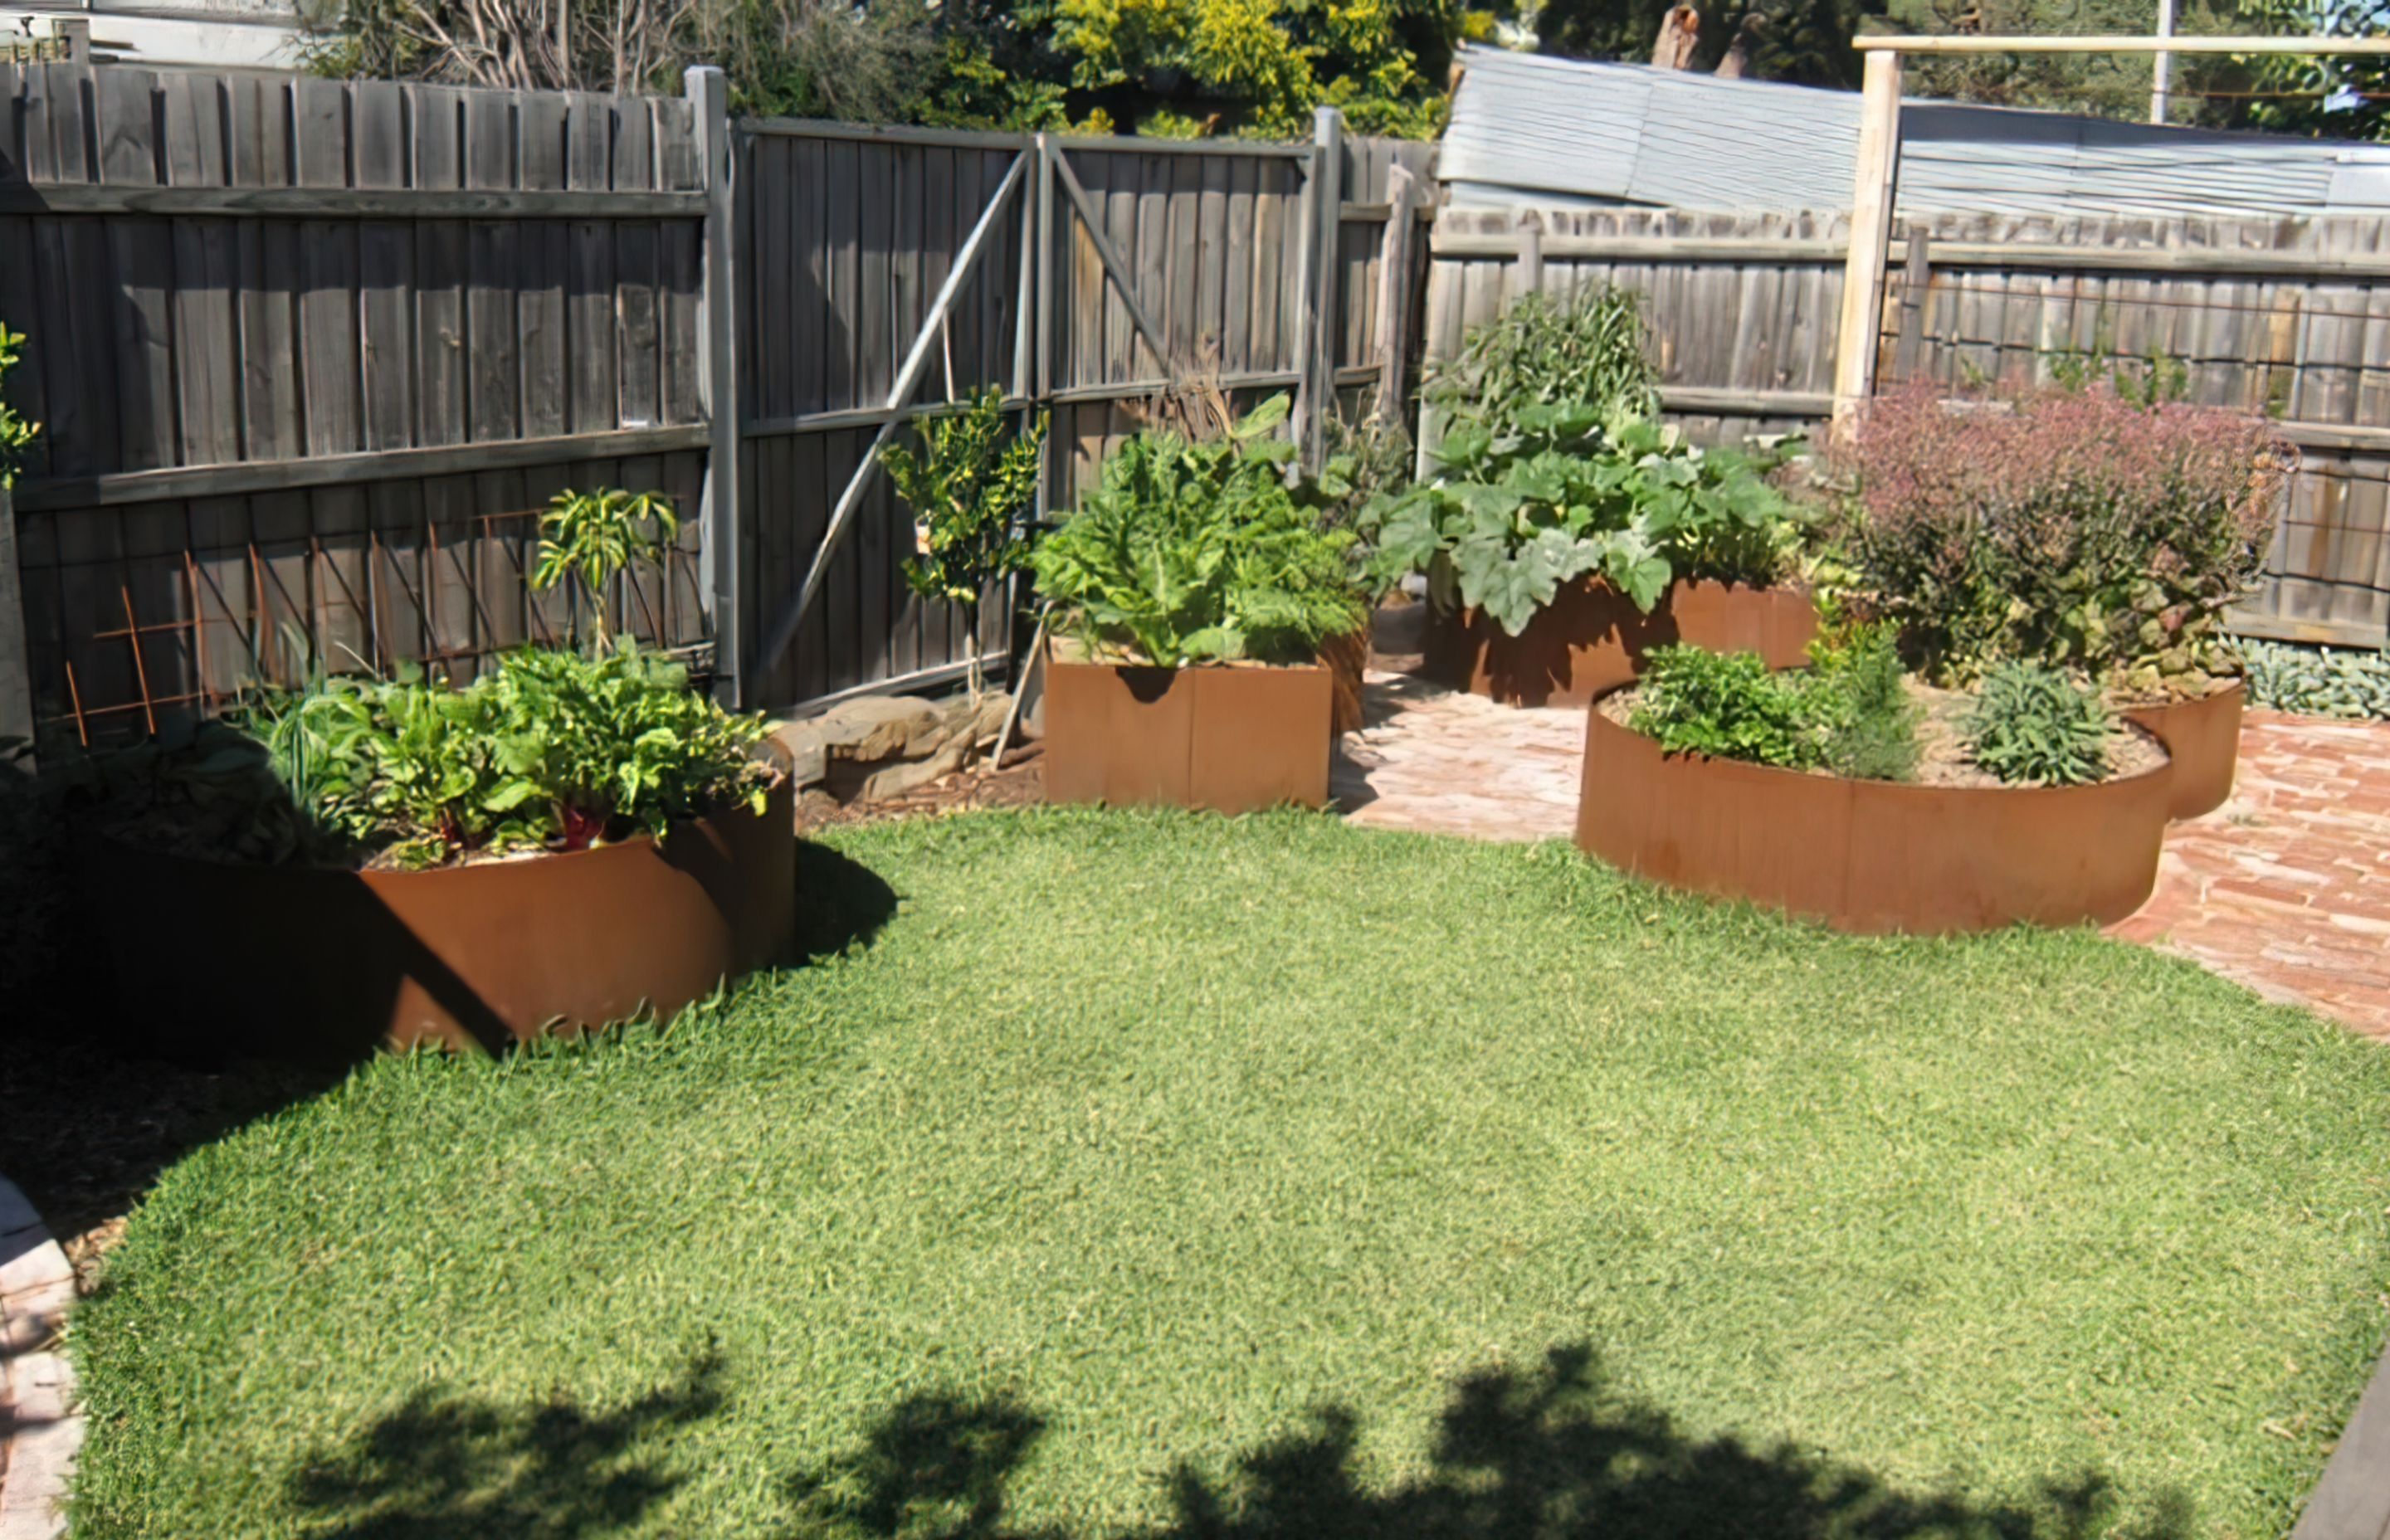 AFTER the garden design. The veggie zone is created using rusted steel raised beds in an organic arrangement